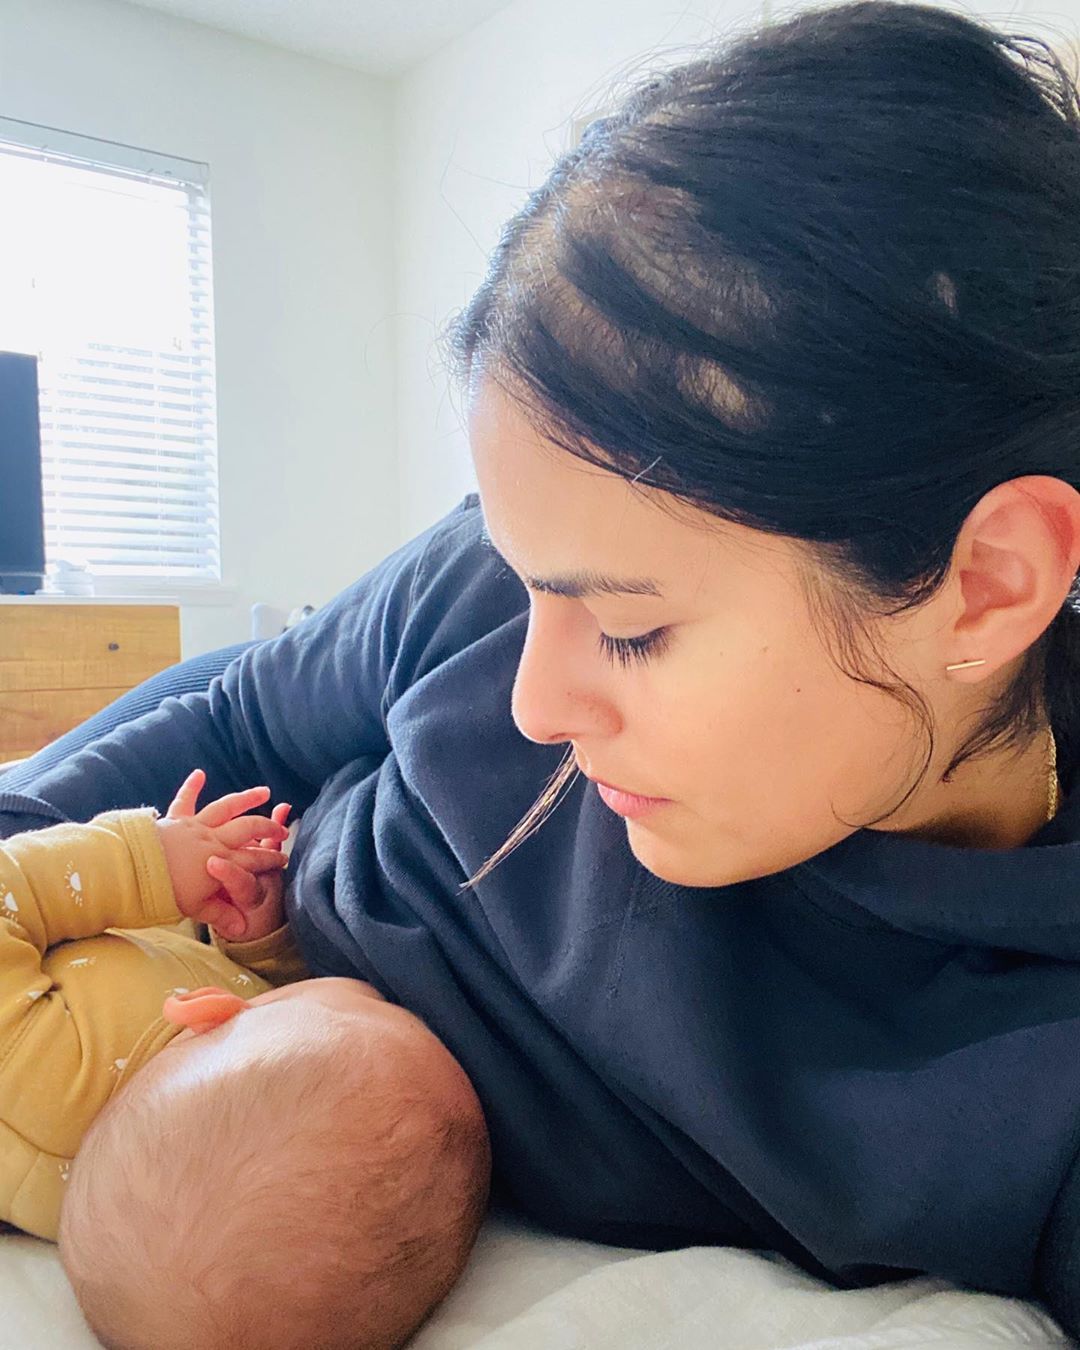 New Mom's Viral Photo Reveals the Struggle of Postpartum Hair Loss